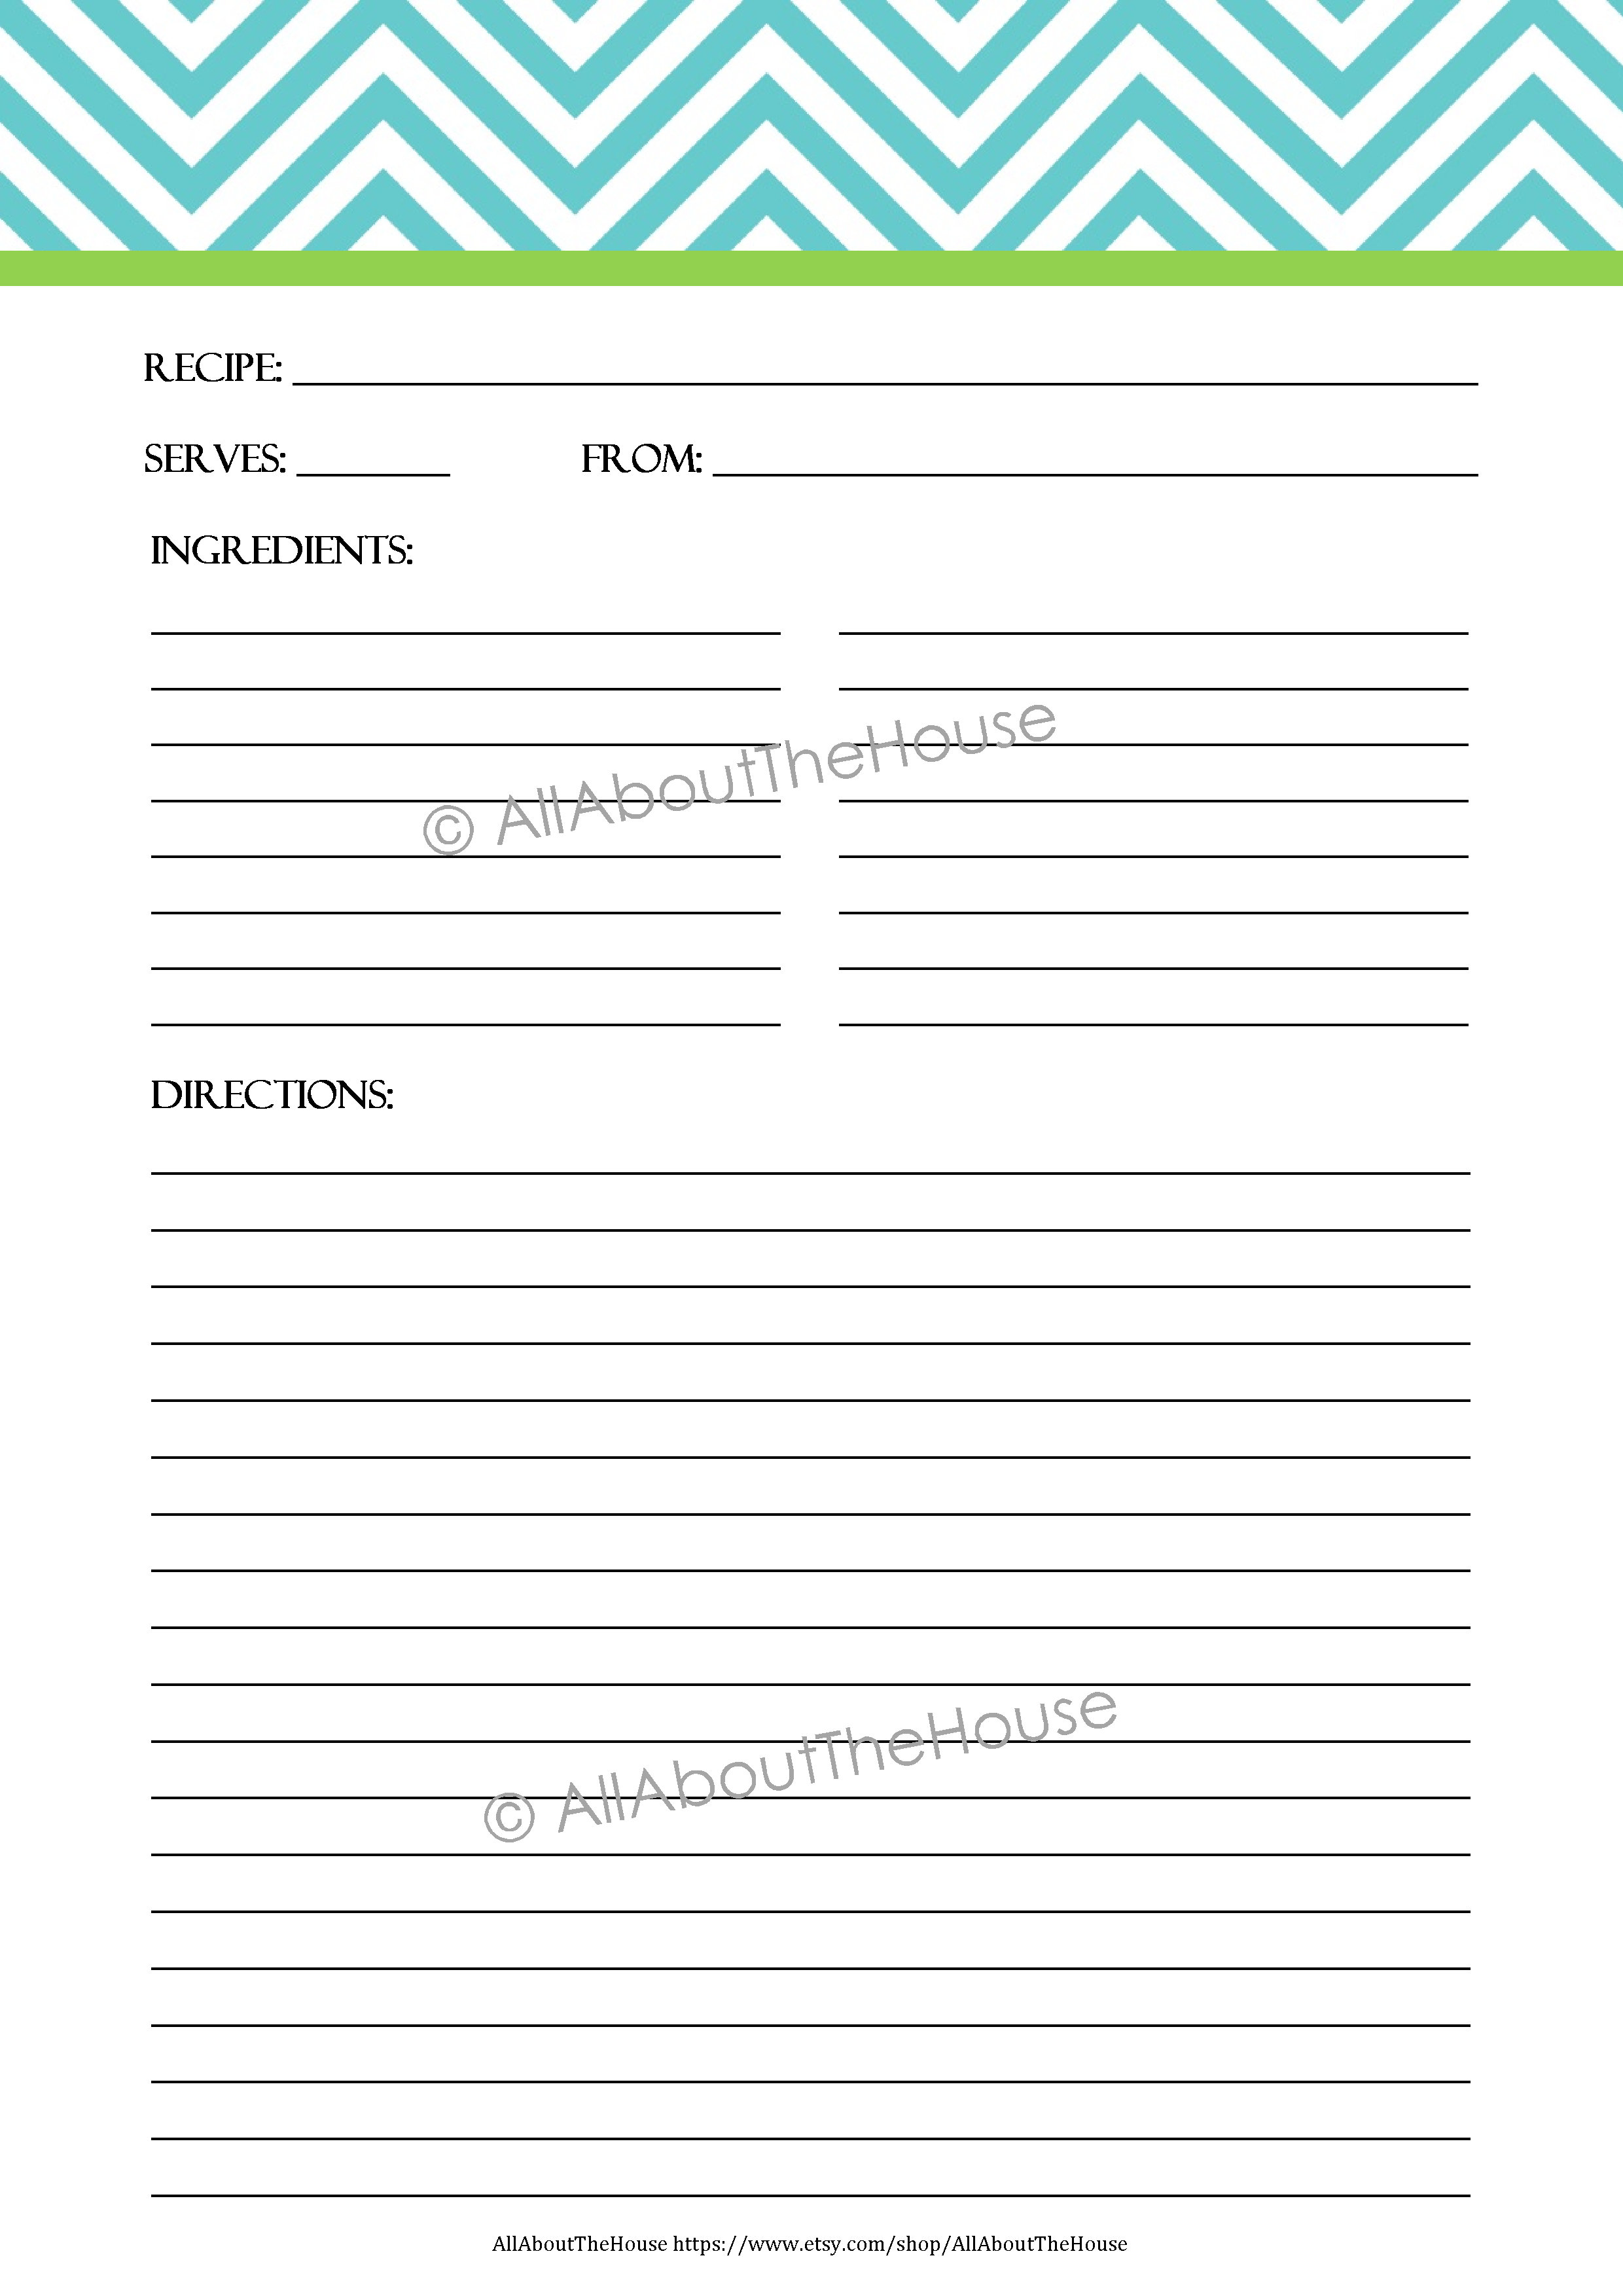 5 Best Images Of Free Printable Recipe Sheets Full Page Recipe 